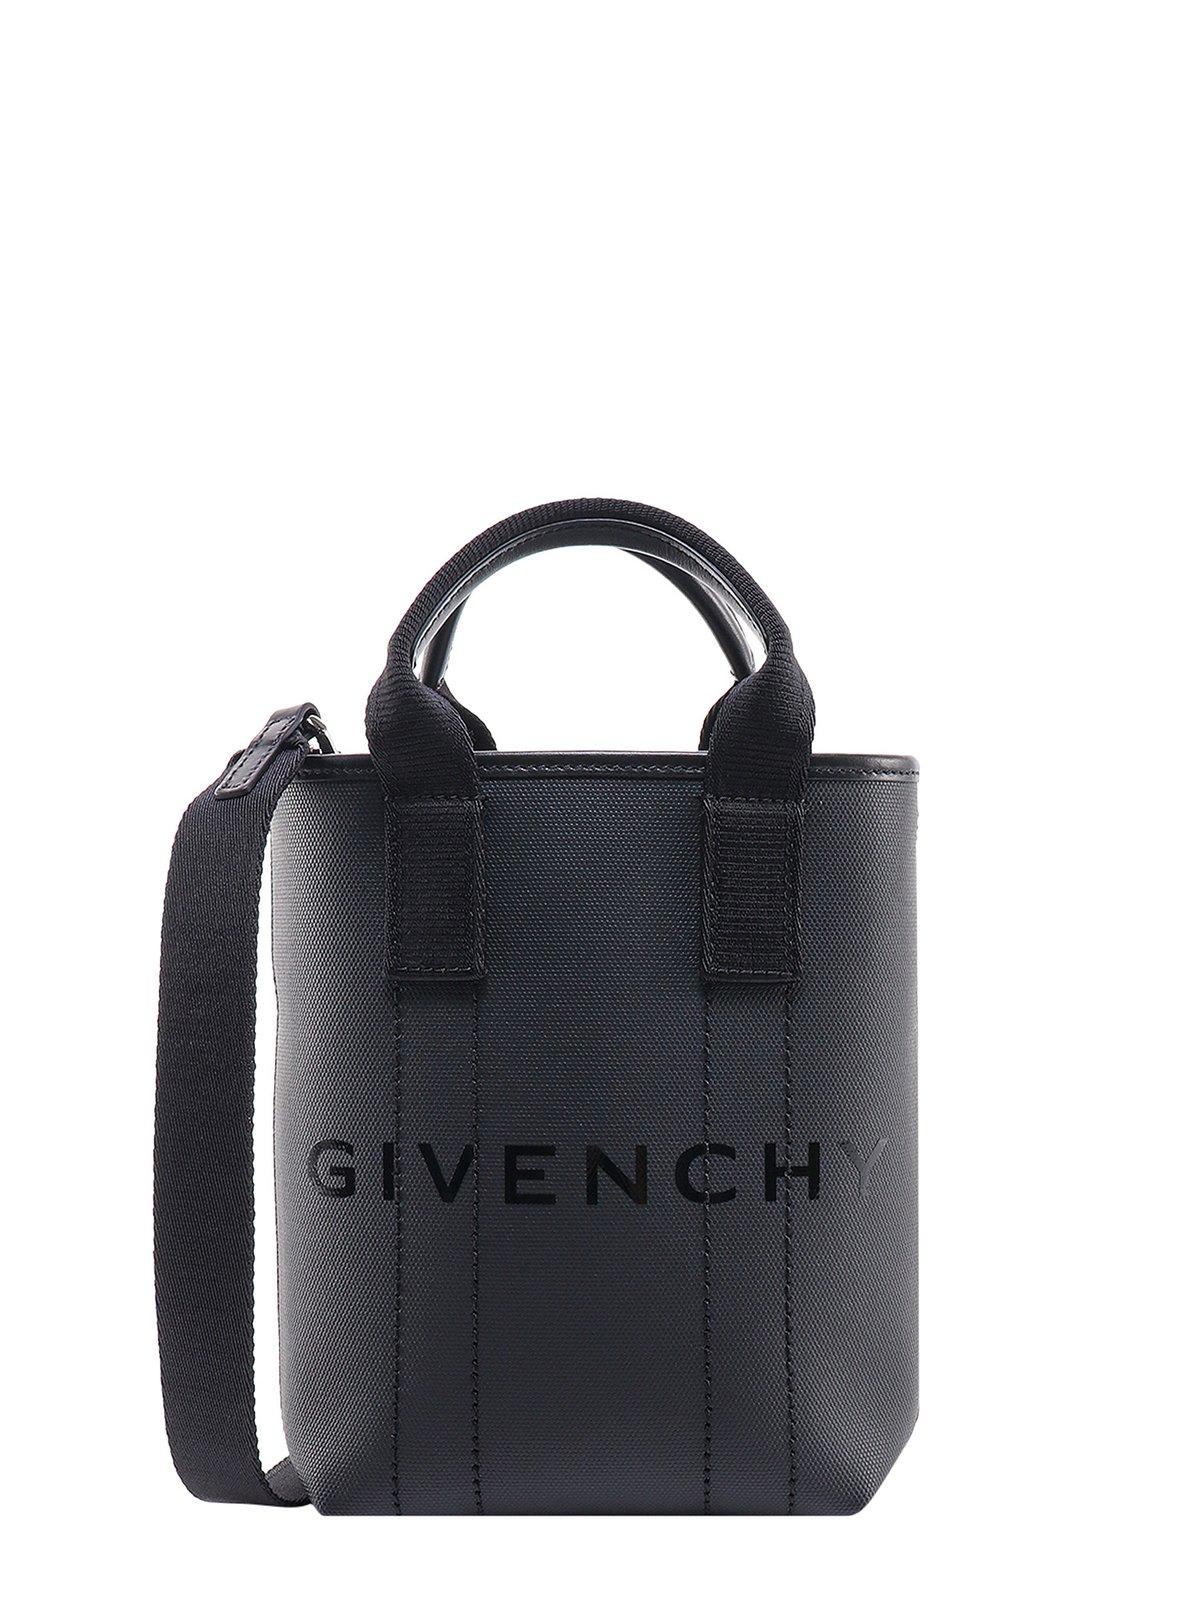 Givenchy G-essentials Small Tote Bag